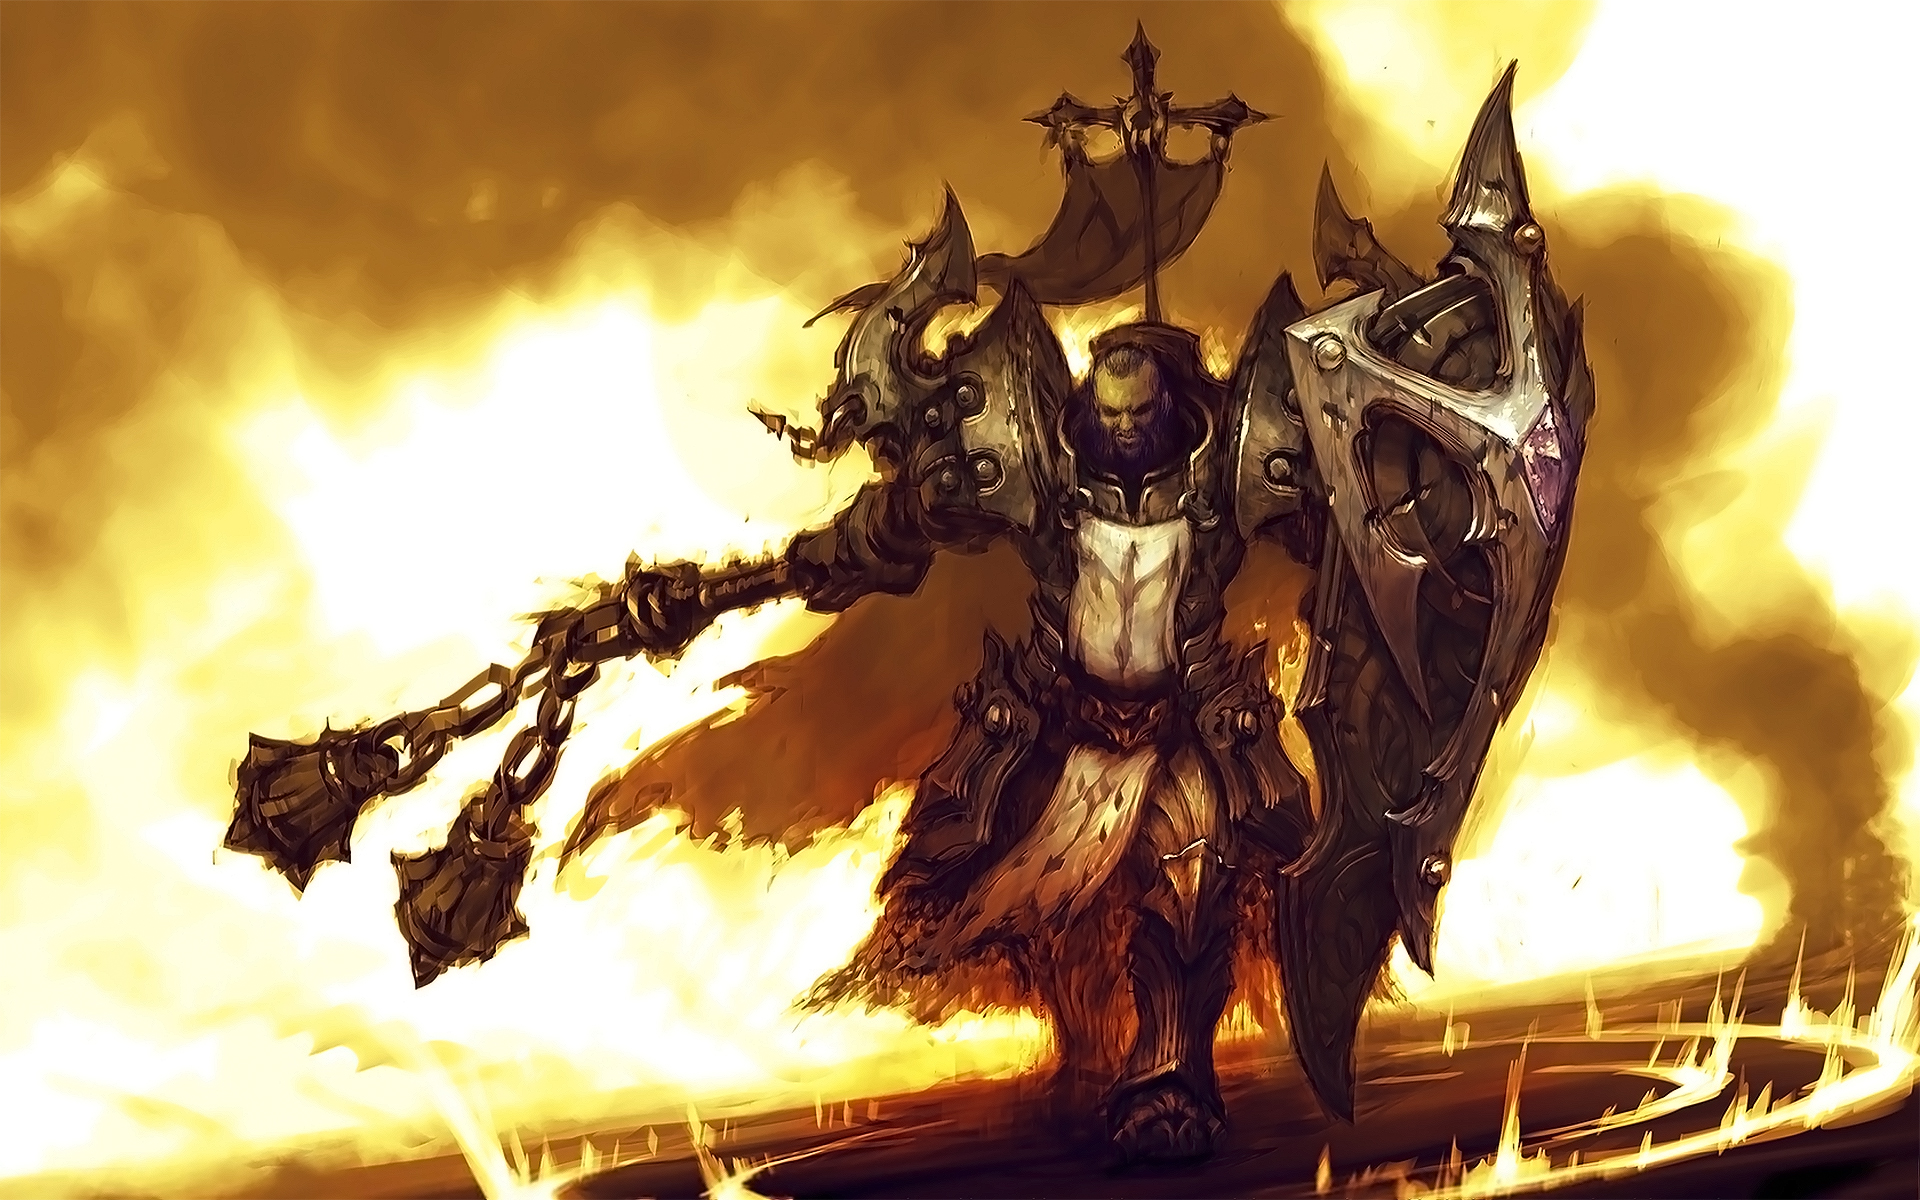 crusader wallpaper,action adventure game,pc game,strategy video game,cg artwork,fictional character